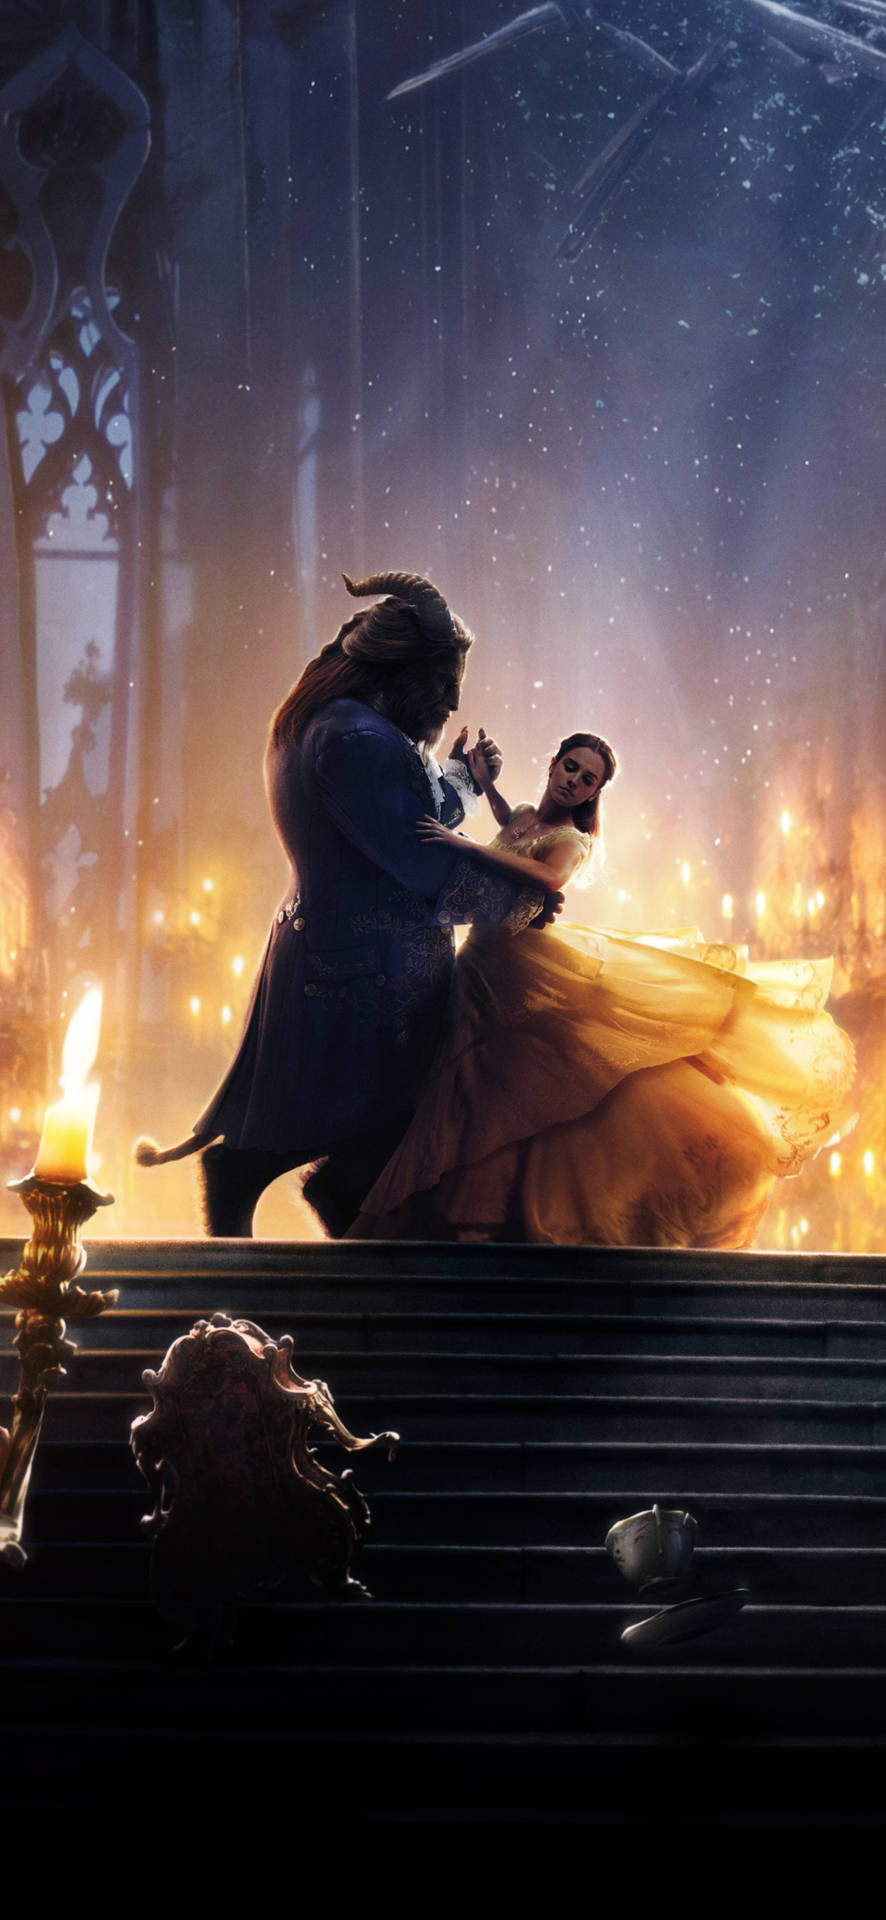 Download Beauty And The Beast Iphone 13 Pro Wallpaper 